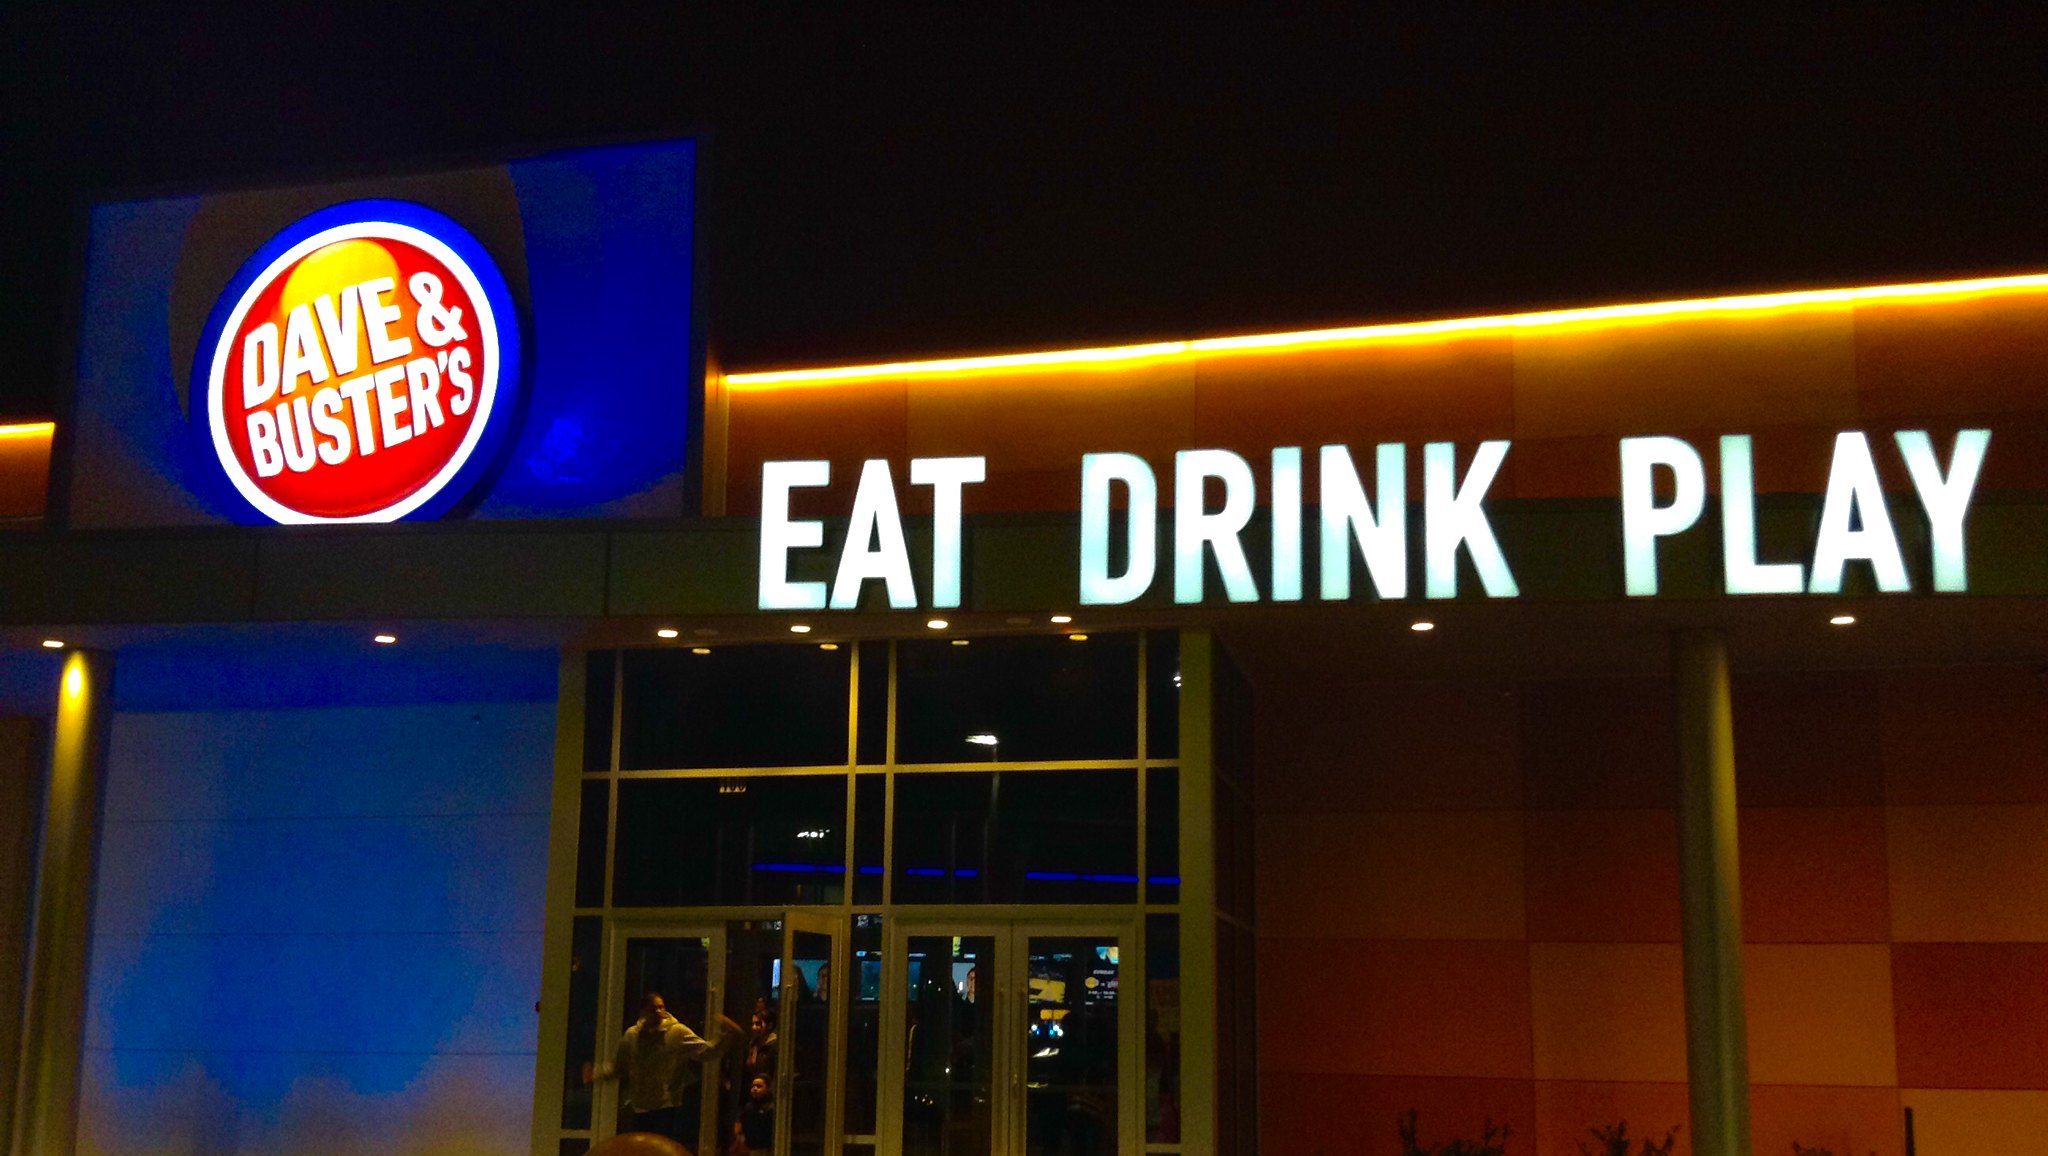 Dave & Busters agrees to settle child labor, meal break violations